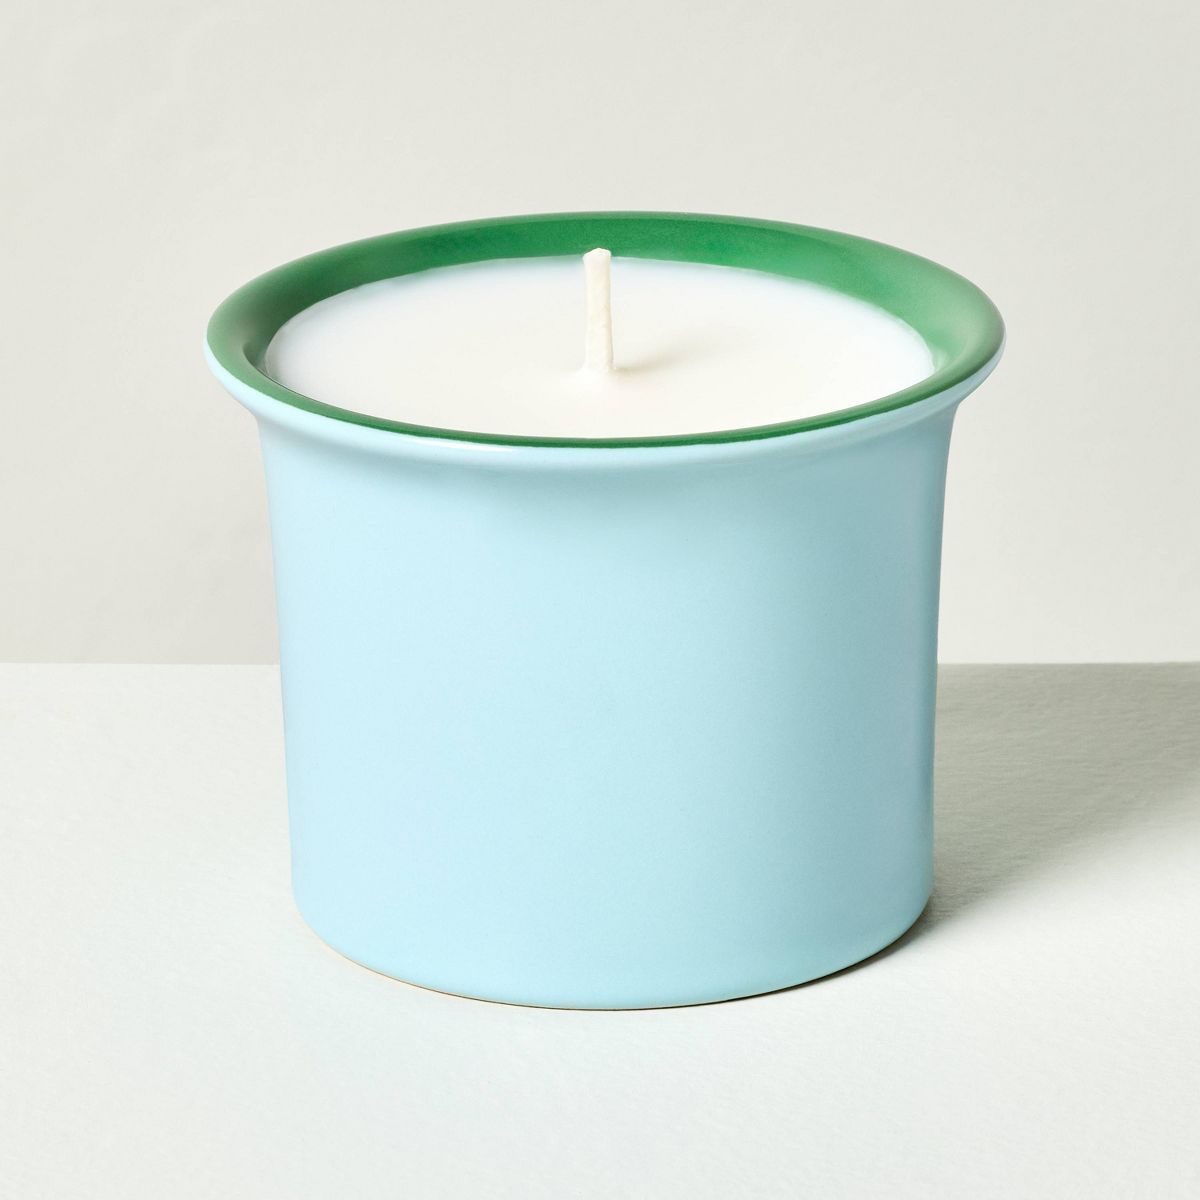 Two-Tone Ceramic Beach House Jar Candle 4.6oz Light Blue/Green - Hearth & Hand™ with Magnolia | Target